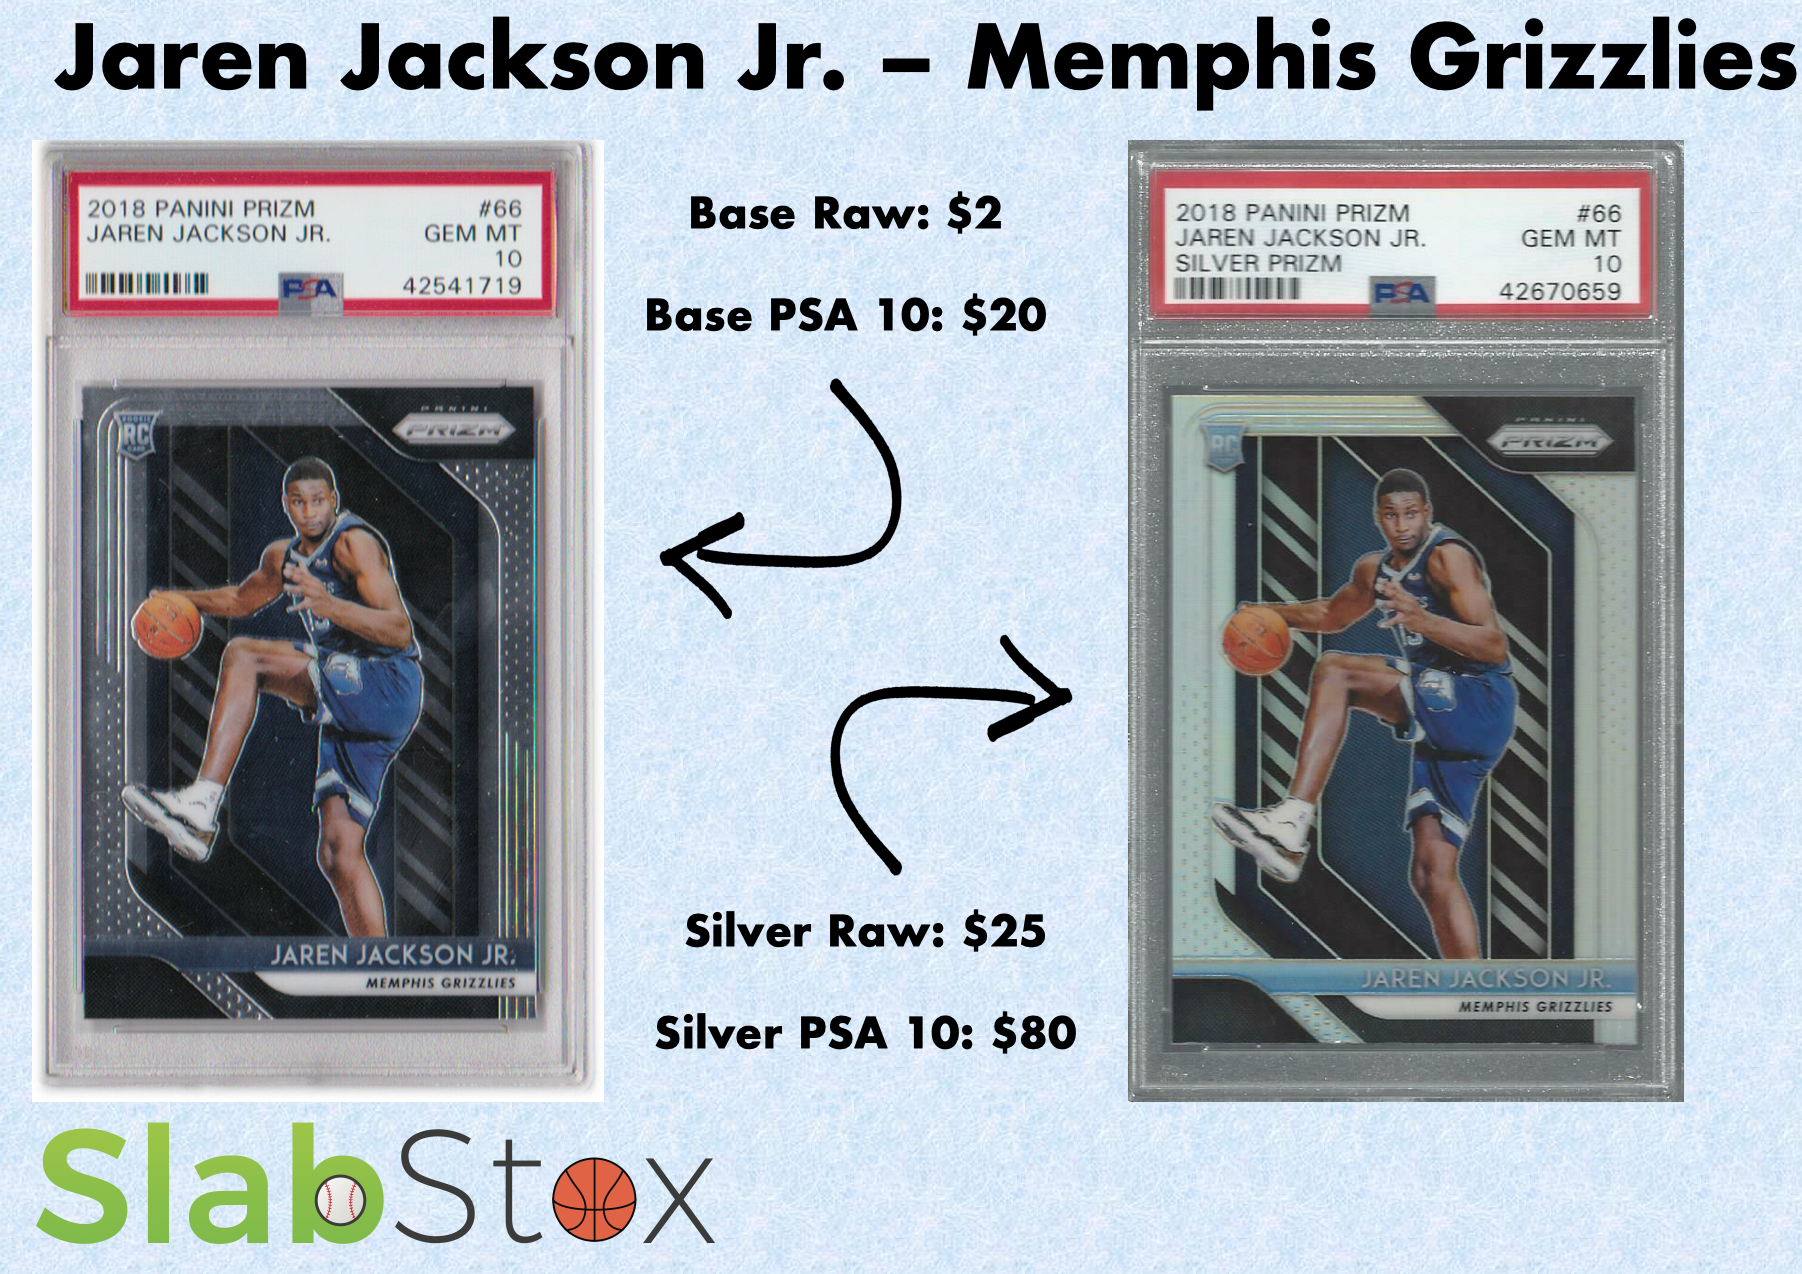 Graphic that displays two different sports cards of Jaren Jackson Jr., Memphis Grizzlies